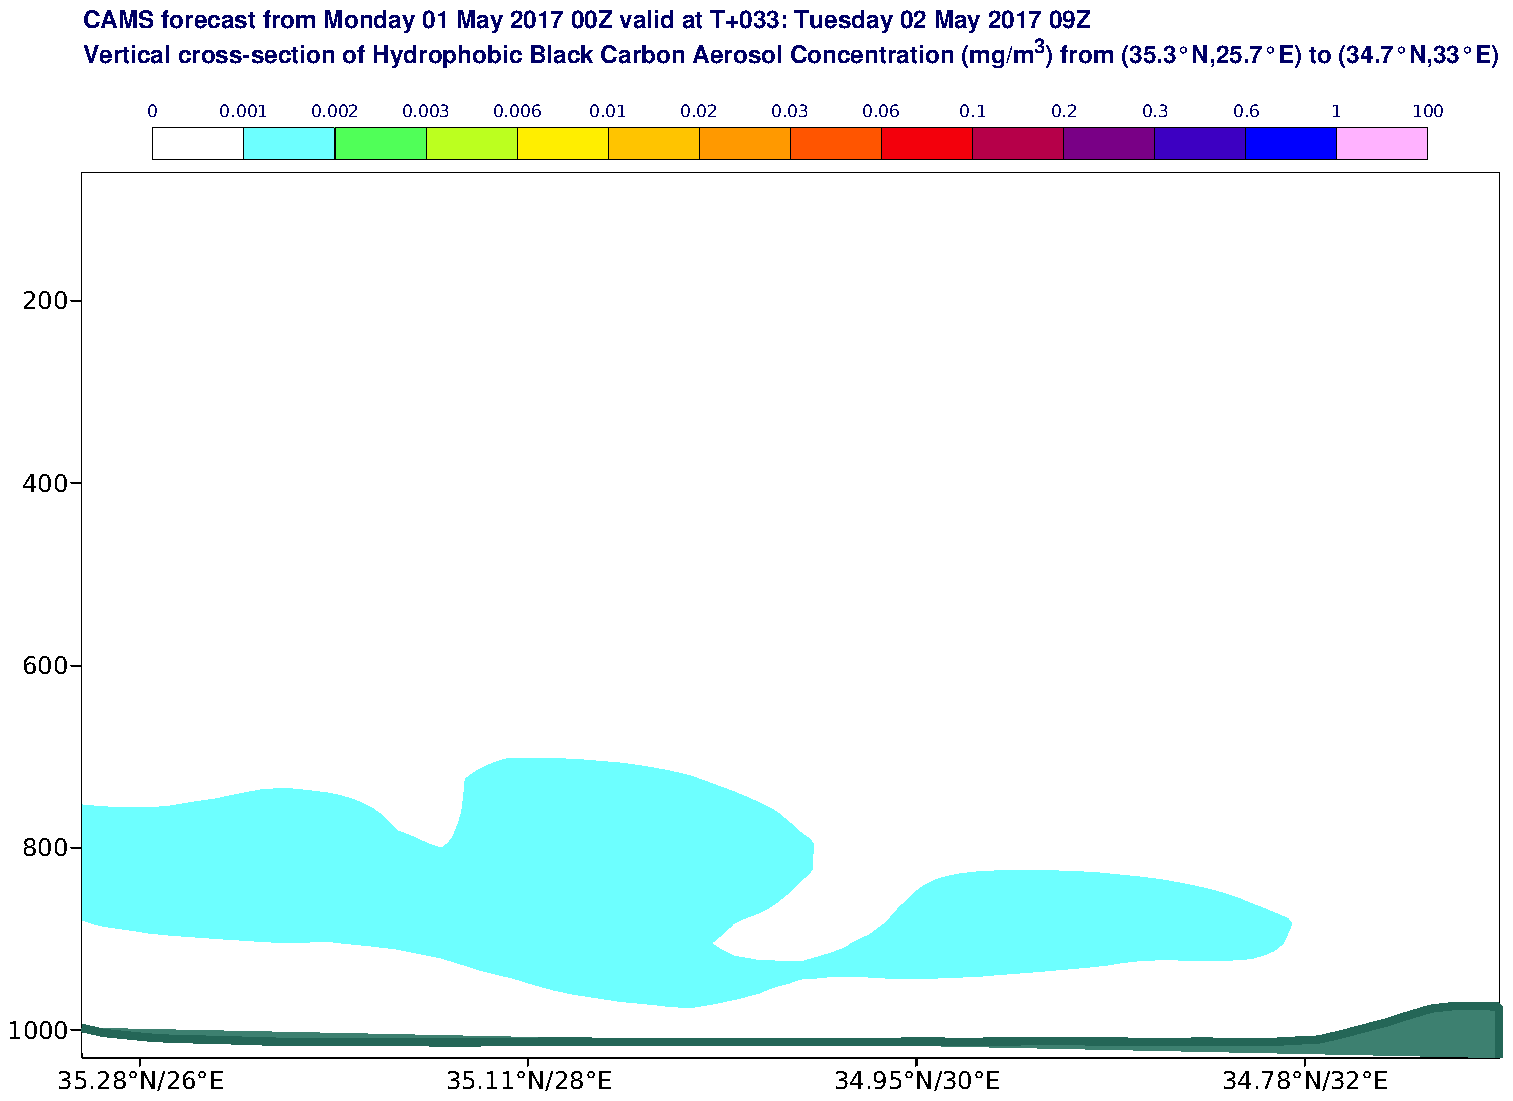 Vertical cross-section of Hydrophobic Black Carbon Aerosol Concentration (mg/m3) valid at T33 - 2017-05-02 09:00